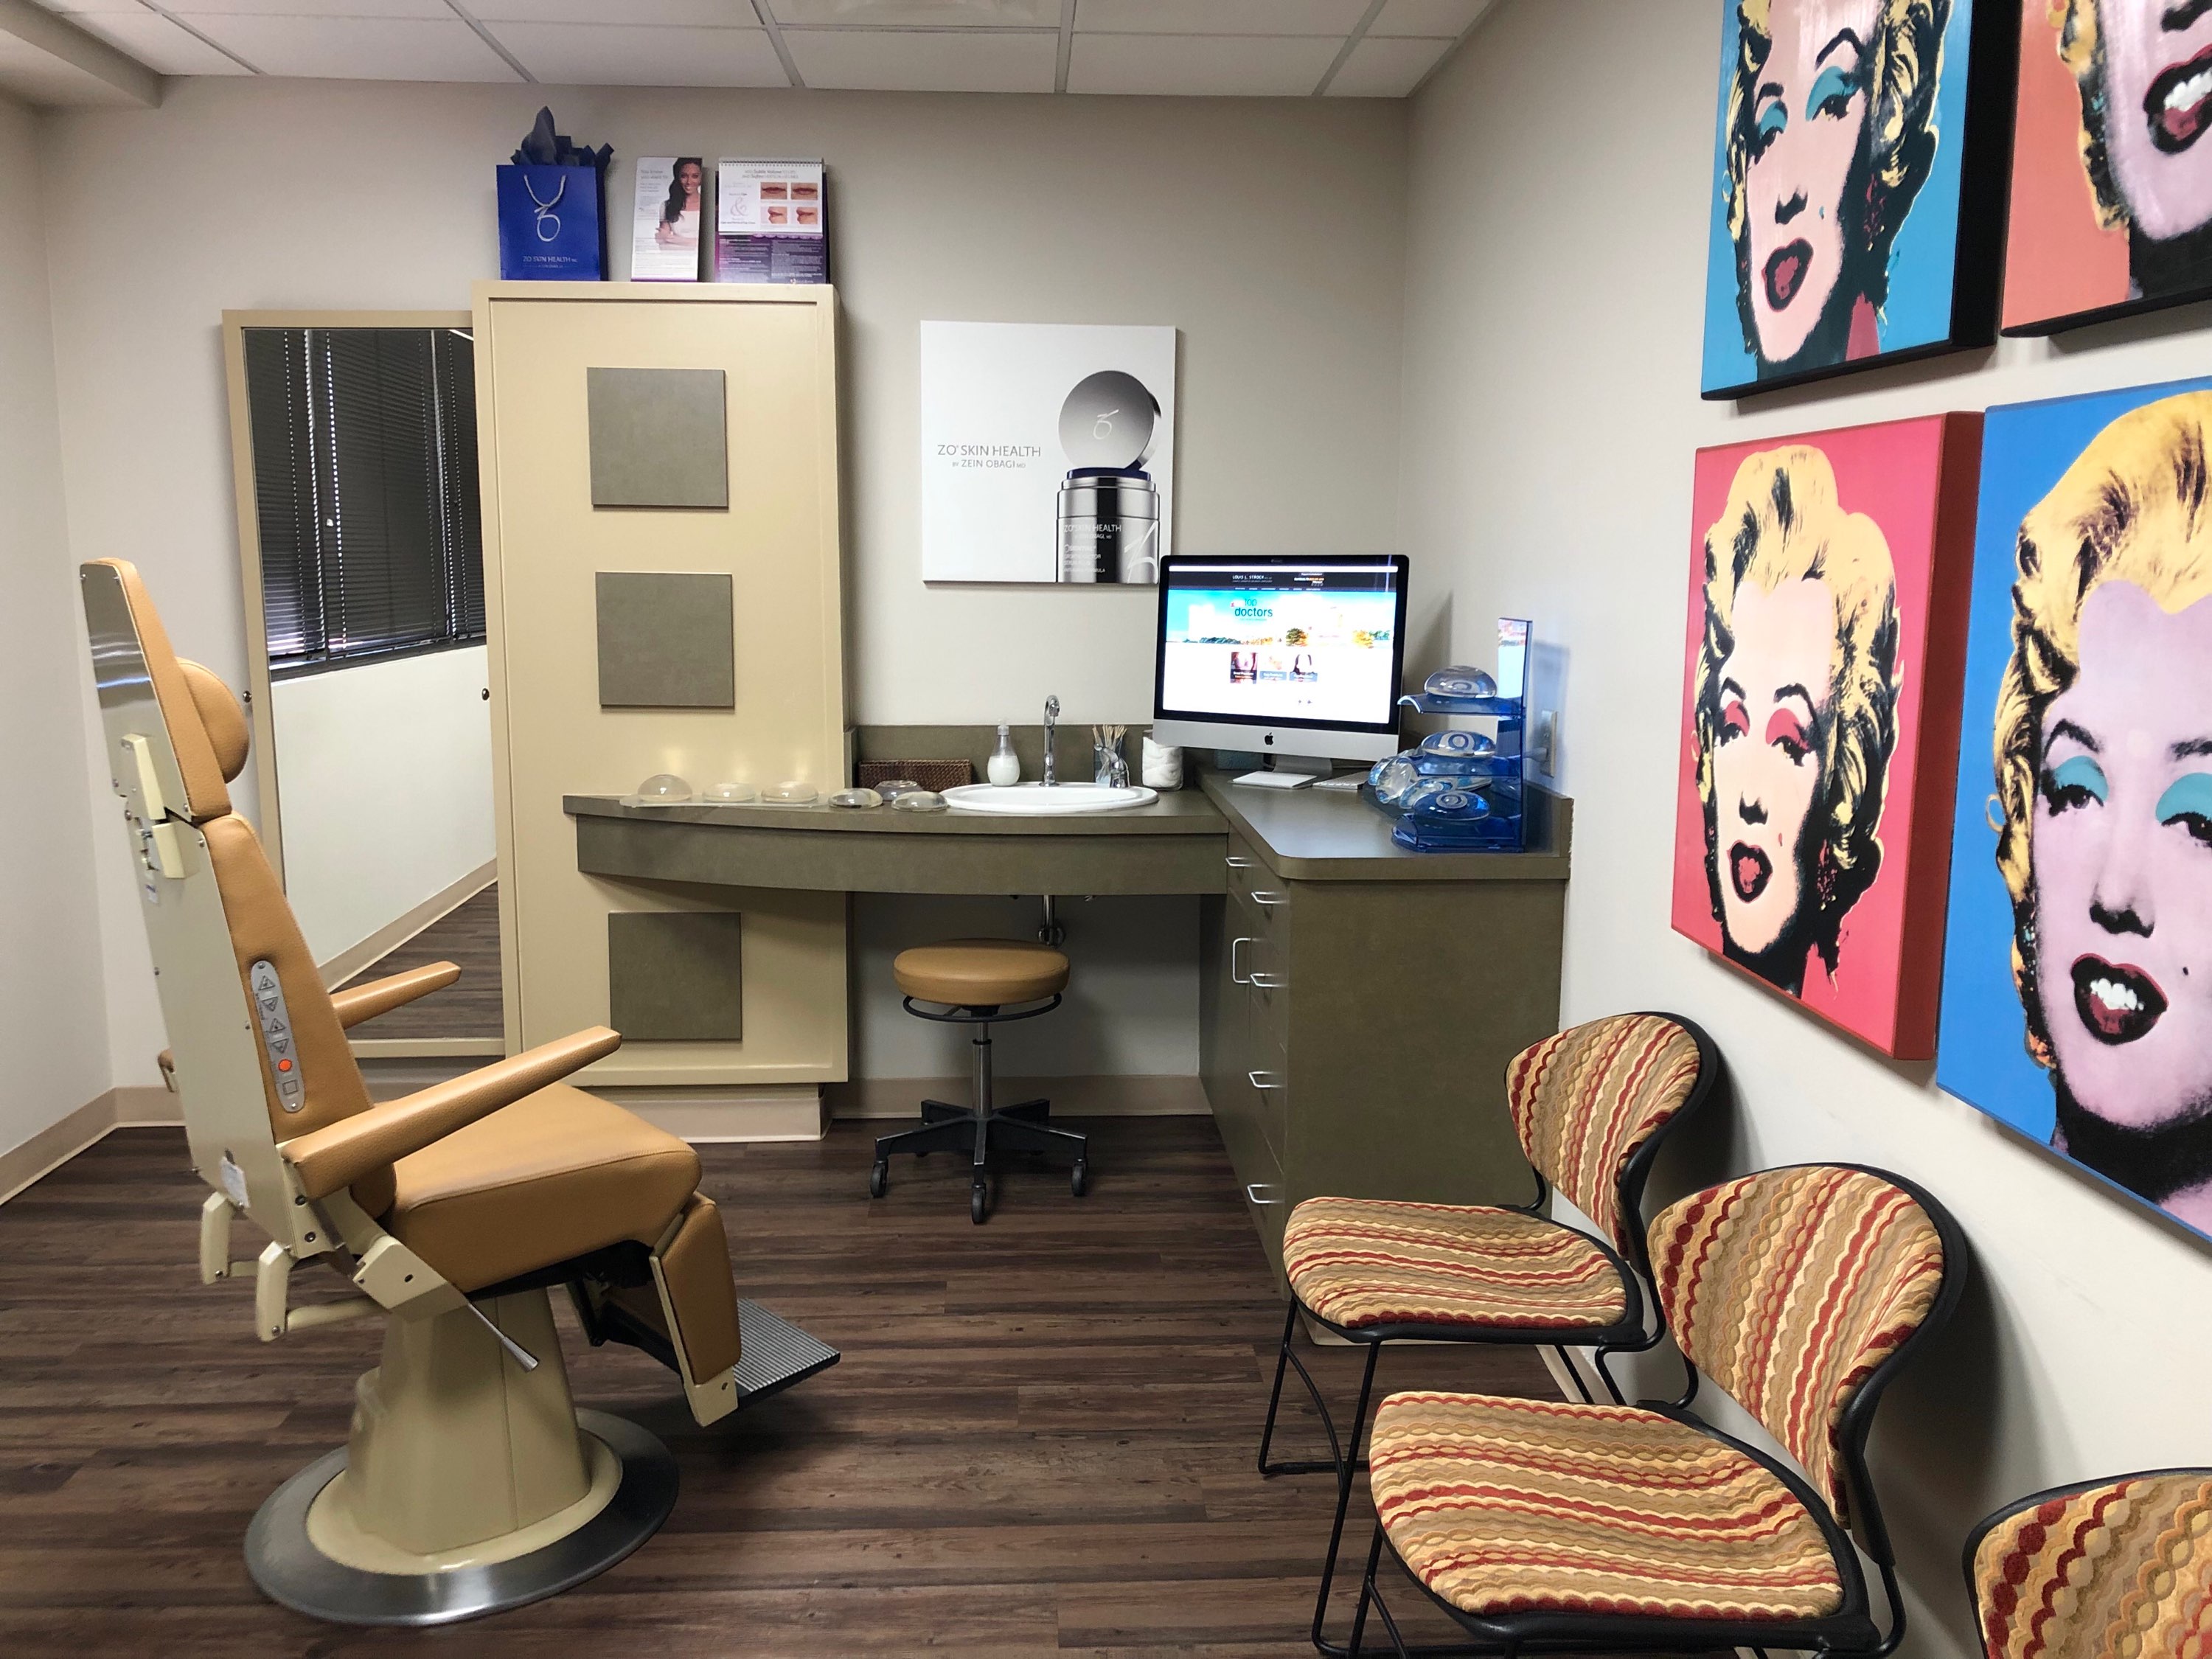 Fort Worth Surgery Center, blocks from our practice, is where Dr. Strock performs most of his surgical procedures.